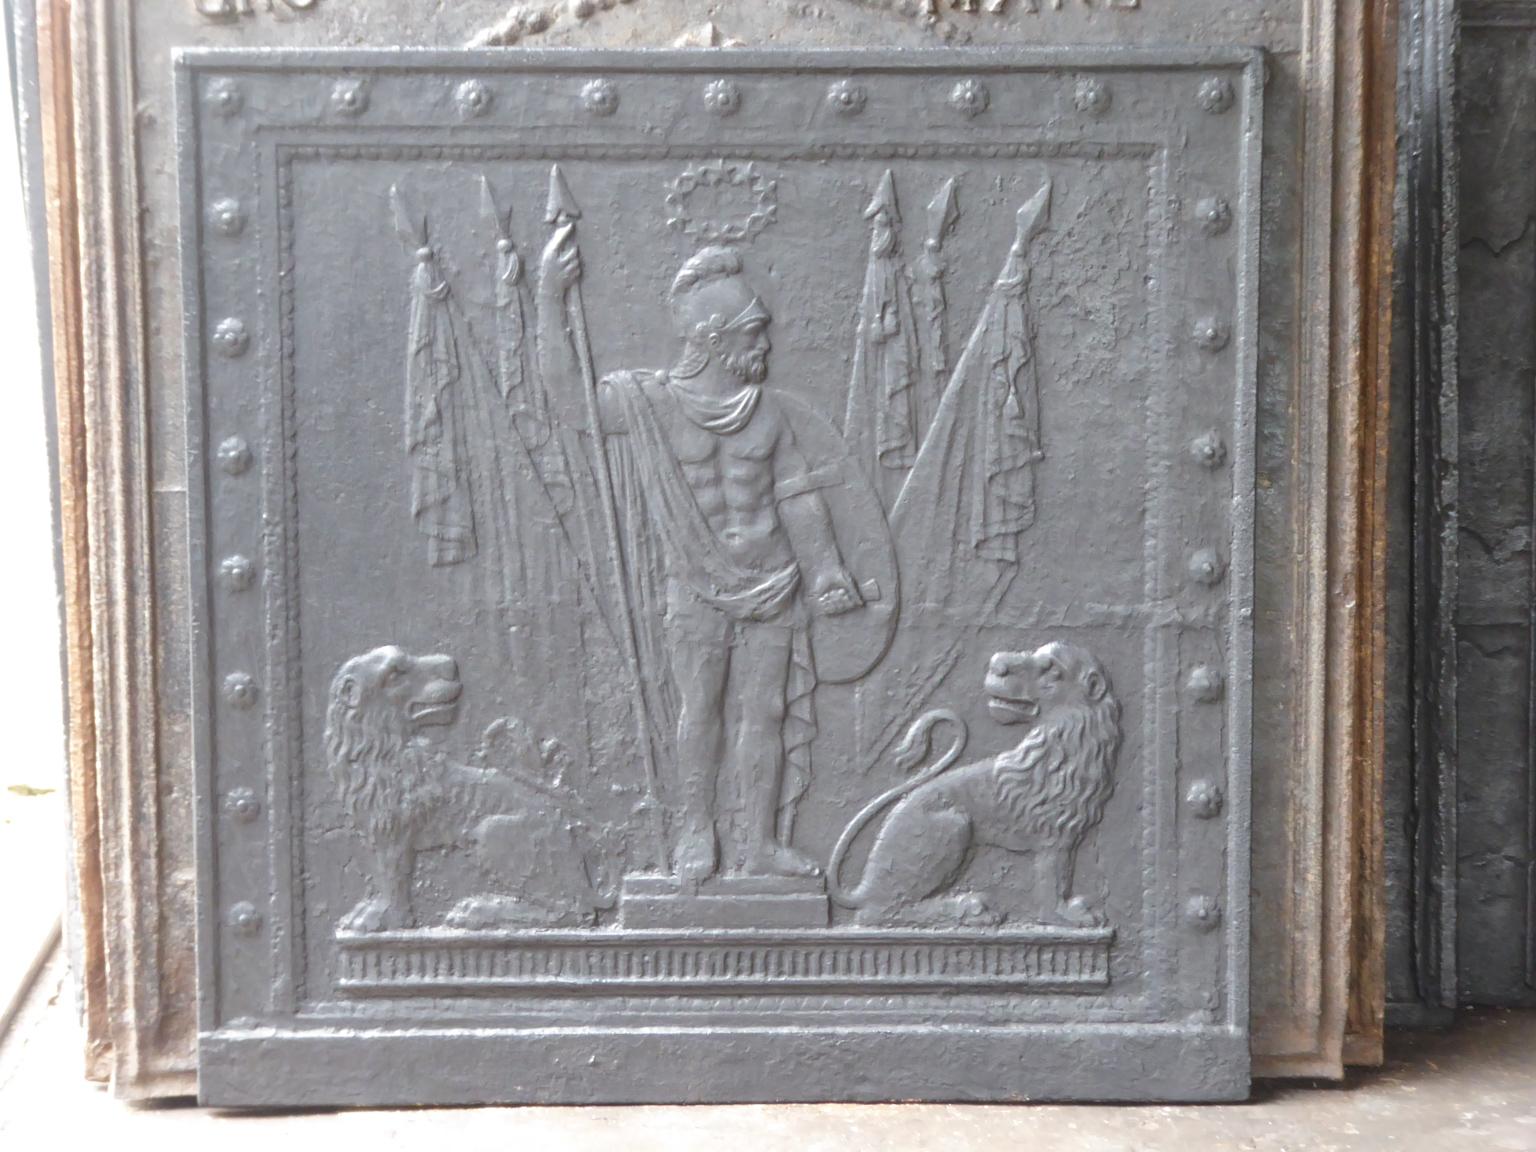 18th / 19th century French neoclassical fireplace fireback with the god mars. God of strength, fertility and protector of cattle.

The fireback is made of cast iron and has a black / pewter patina. The fireback is in a good condition and does not